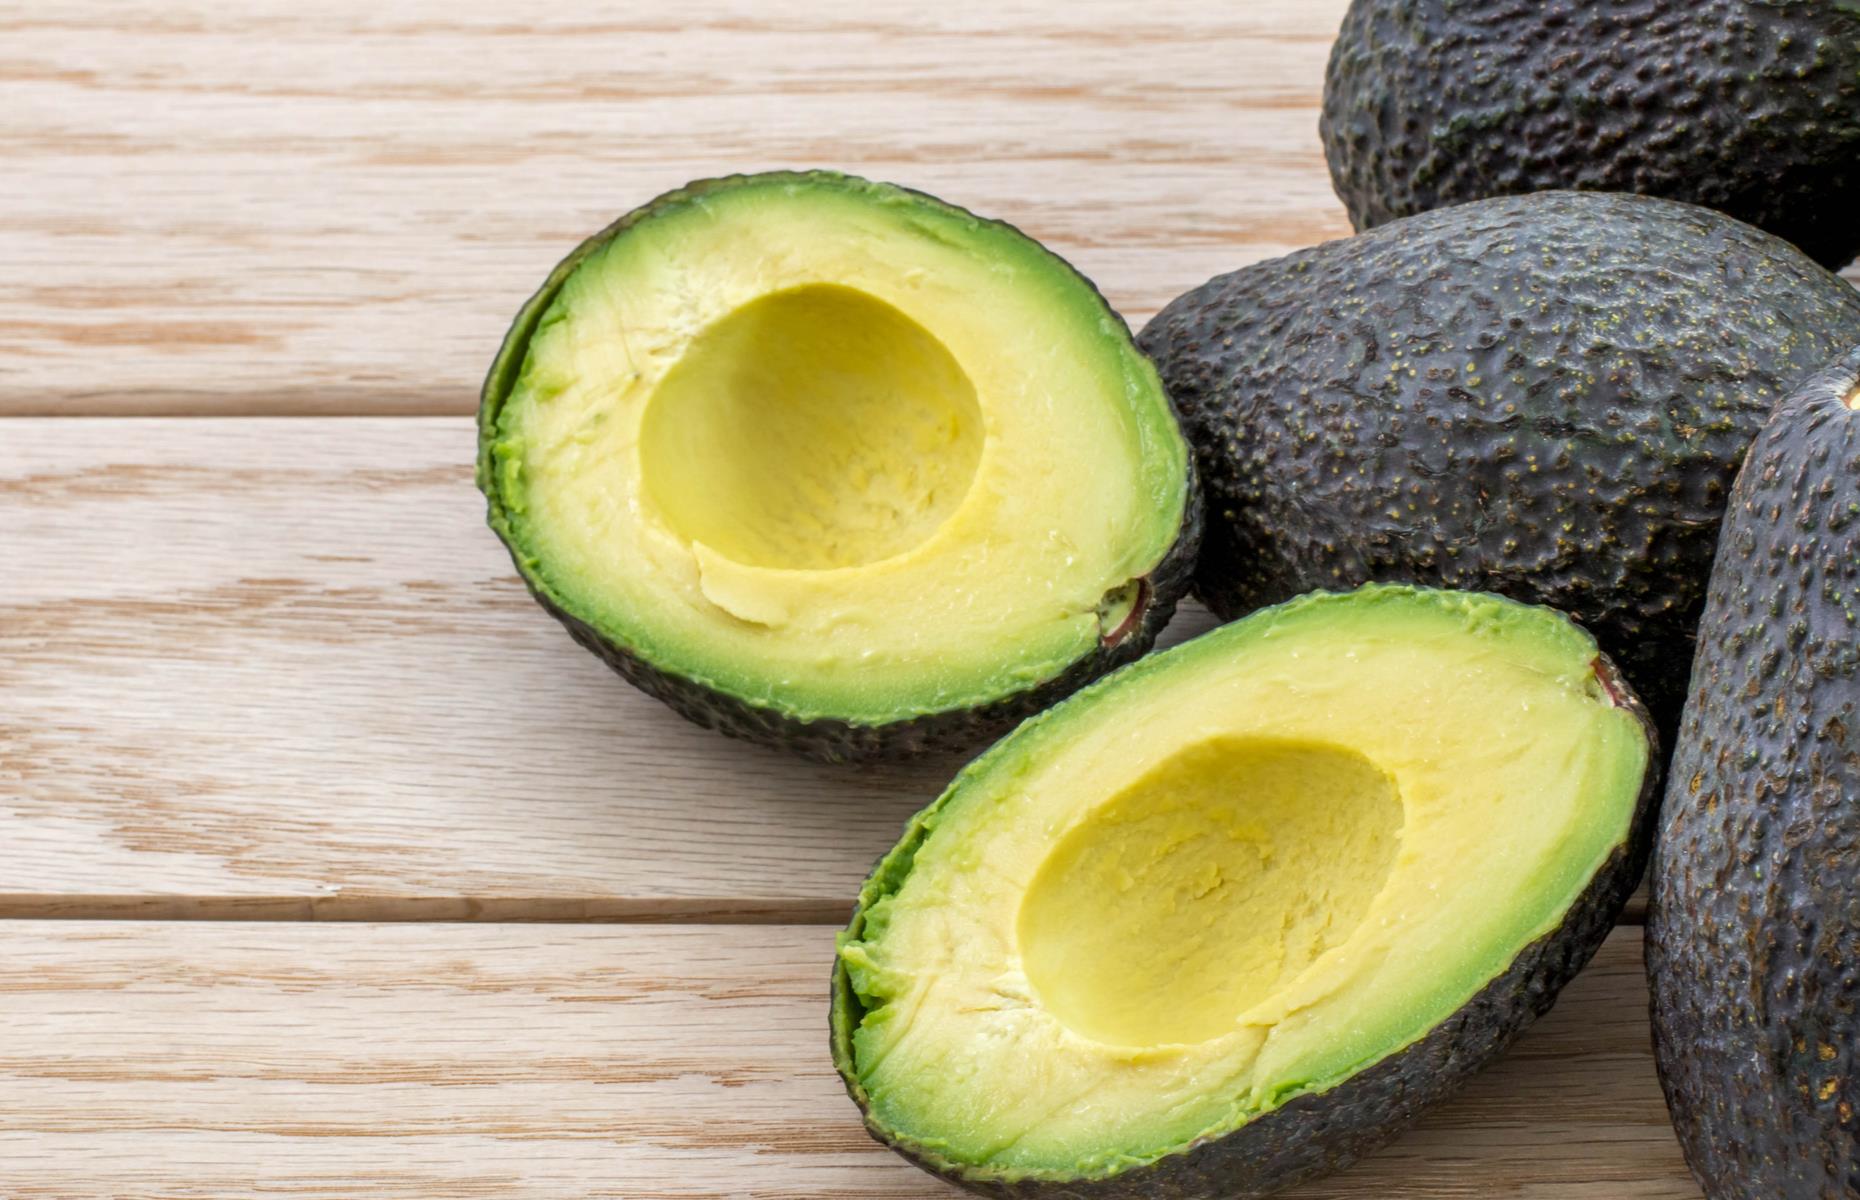 <p>Avocados were <a href="https://www.thepacker.com/article/corrected-artichokes-avocados-state-foods-california#:~:text=California%20Lt.,and%20rice%20the%20state%20grain.">declared the state’s official fruit in 2013</a>, at the same time as artichokes were named the state vegetable. Both play a part in trendy sharing dishes guacamole and steamed artichokes, but avocados are particularly apt. It’s hard to find a restaurant or café that doesn’t have them on the menu, whether that’s in a burrito or chopped up in a breakfast scramble, while the popular Hass variety is native to California.</p>